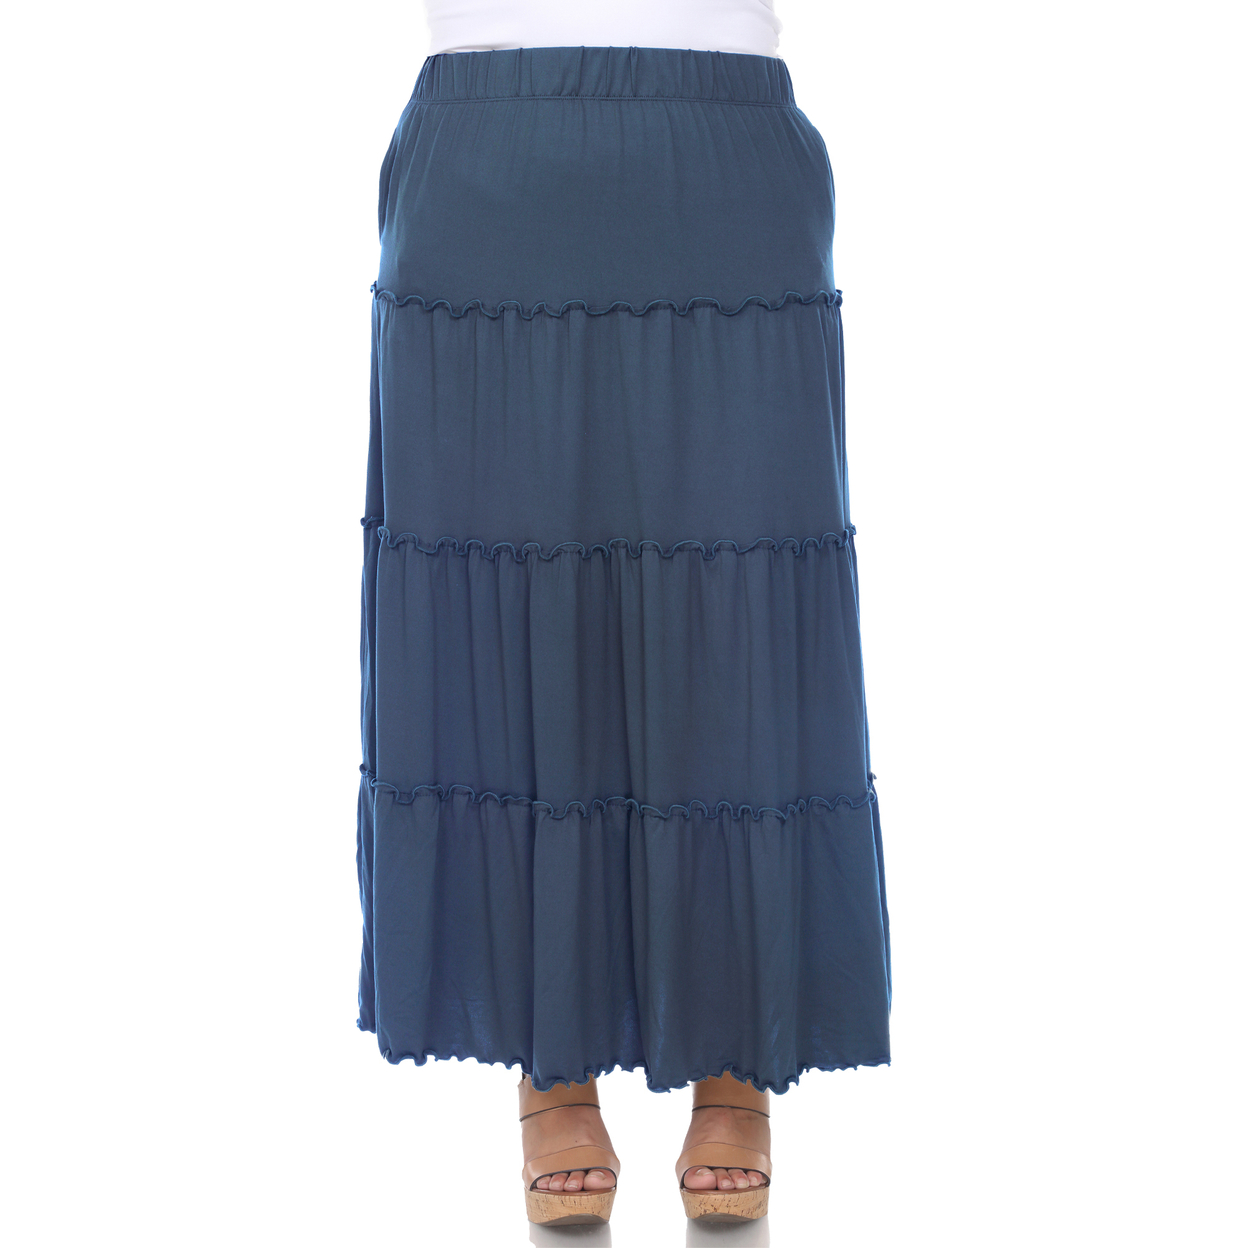 White Mark Women's Plus Size Tiered Maxi Skirt With Pockets - Denim Blue, 1x